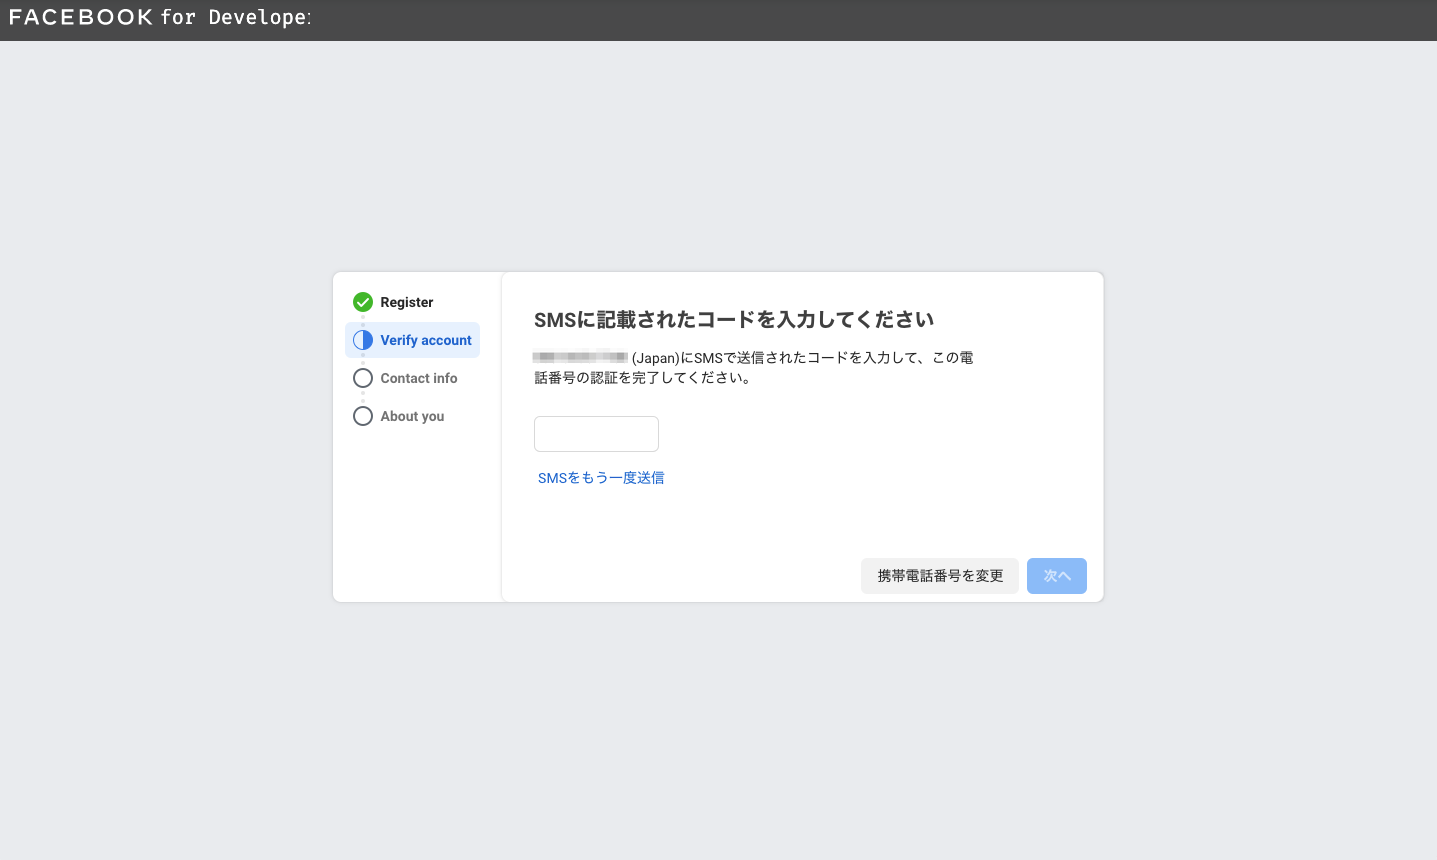 Meta for Developers 登録 - SMS に記載されたコードを入力してください